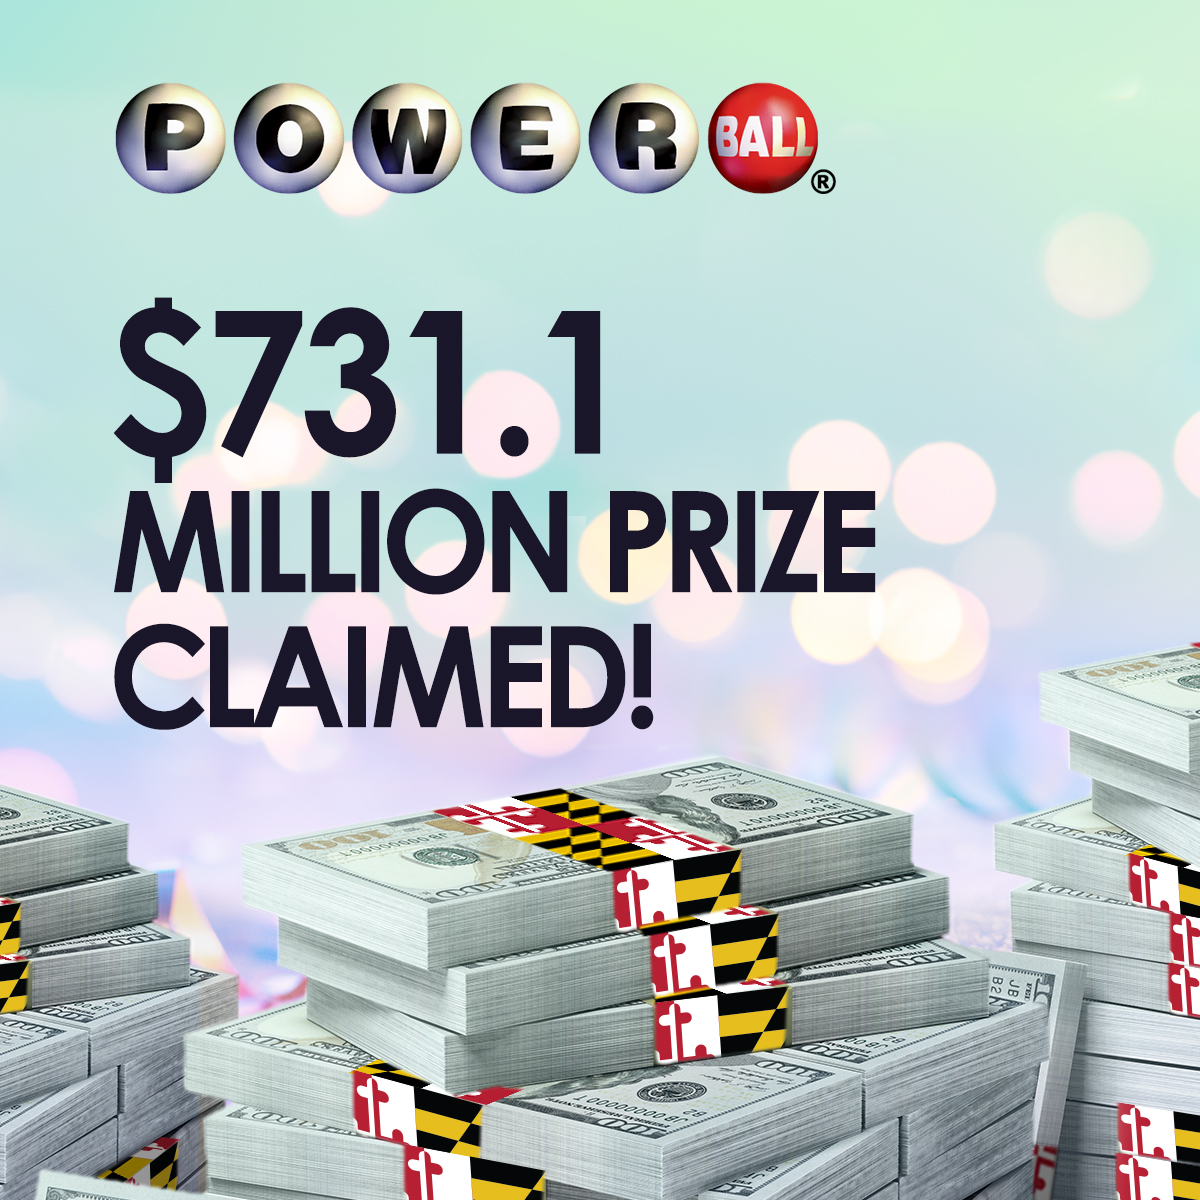 The largest prize in Maryland Lottery history has finally been claimed! Anonymous winners, who named themselves “The Power Pack,” claimed the $731.1 million Powerball prize. The winning ticket was sold at Coney Market in Lonaconing in Western Maryland. https://t.co/VK4o1aGT4y https://t.co/6XHvWCeifm